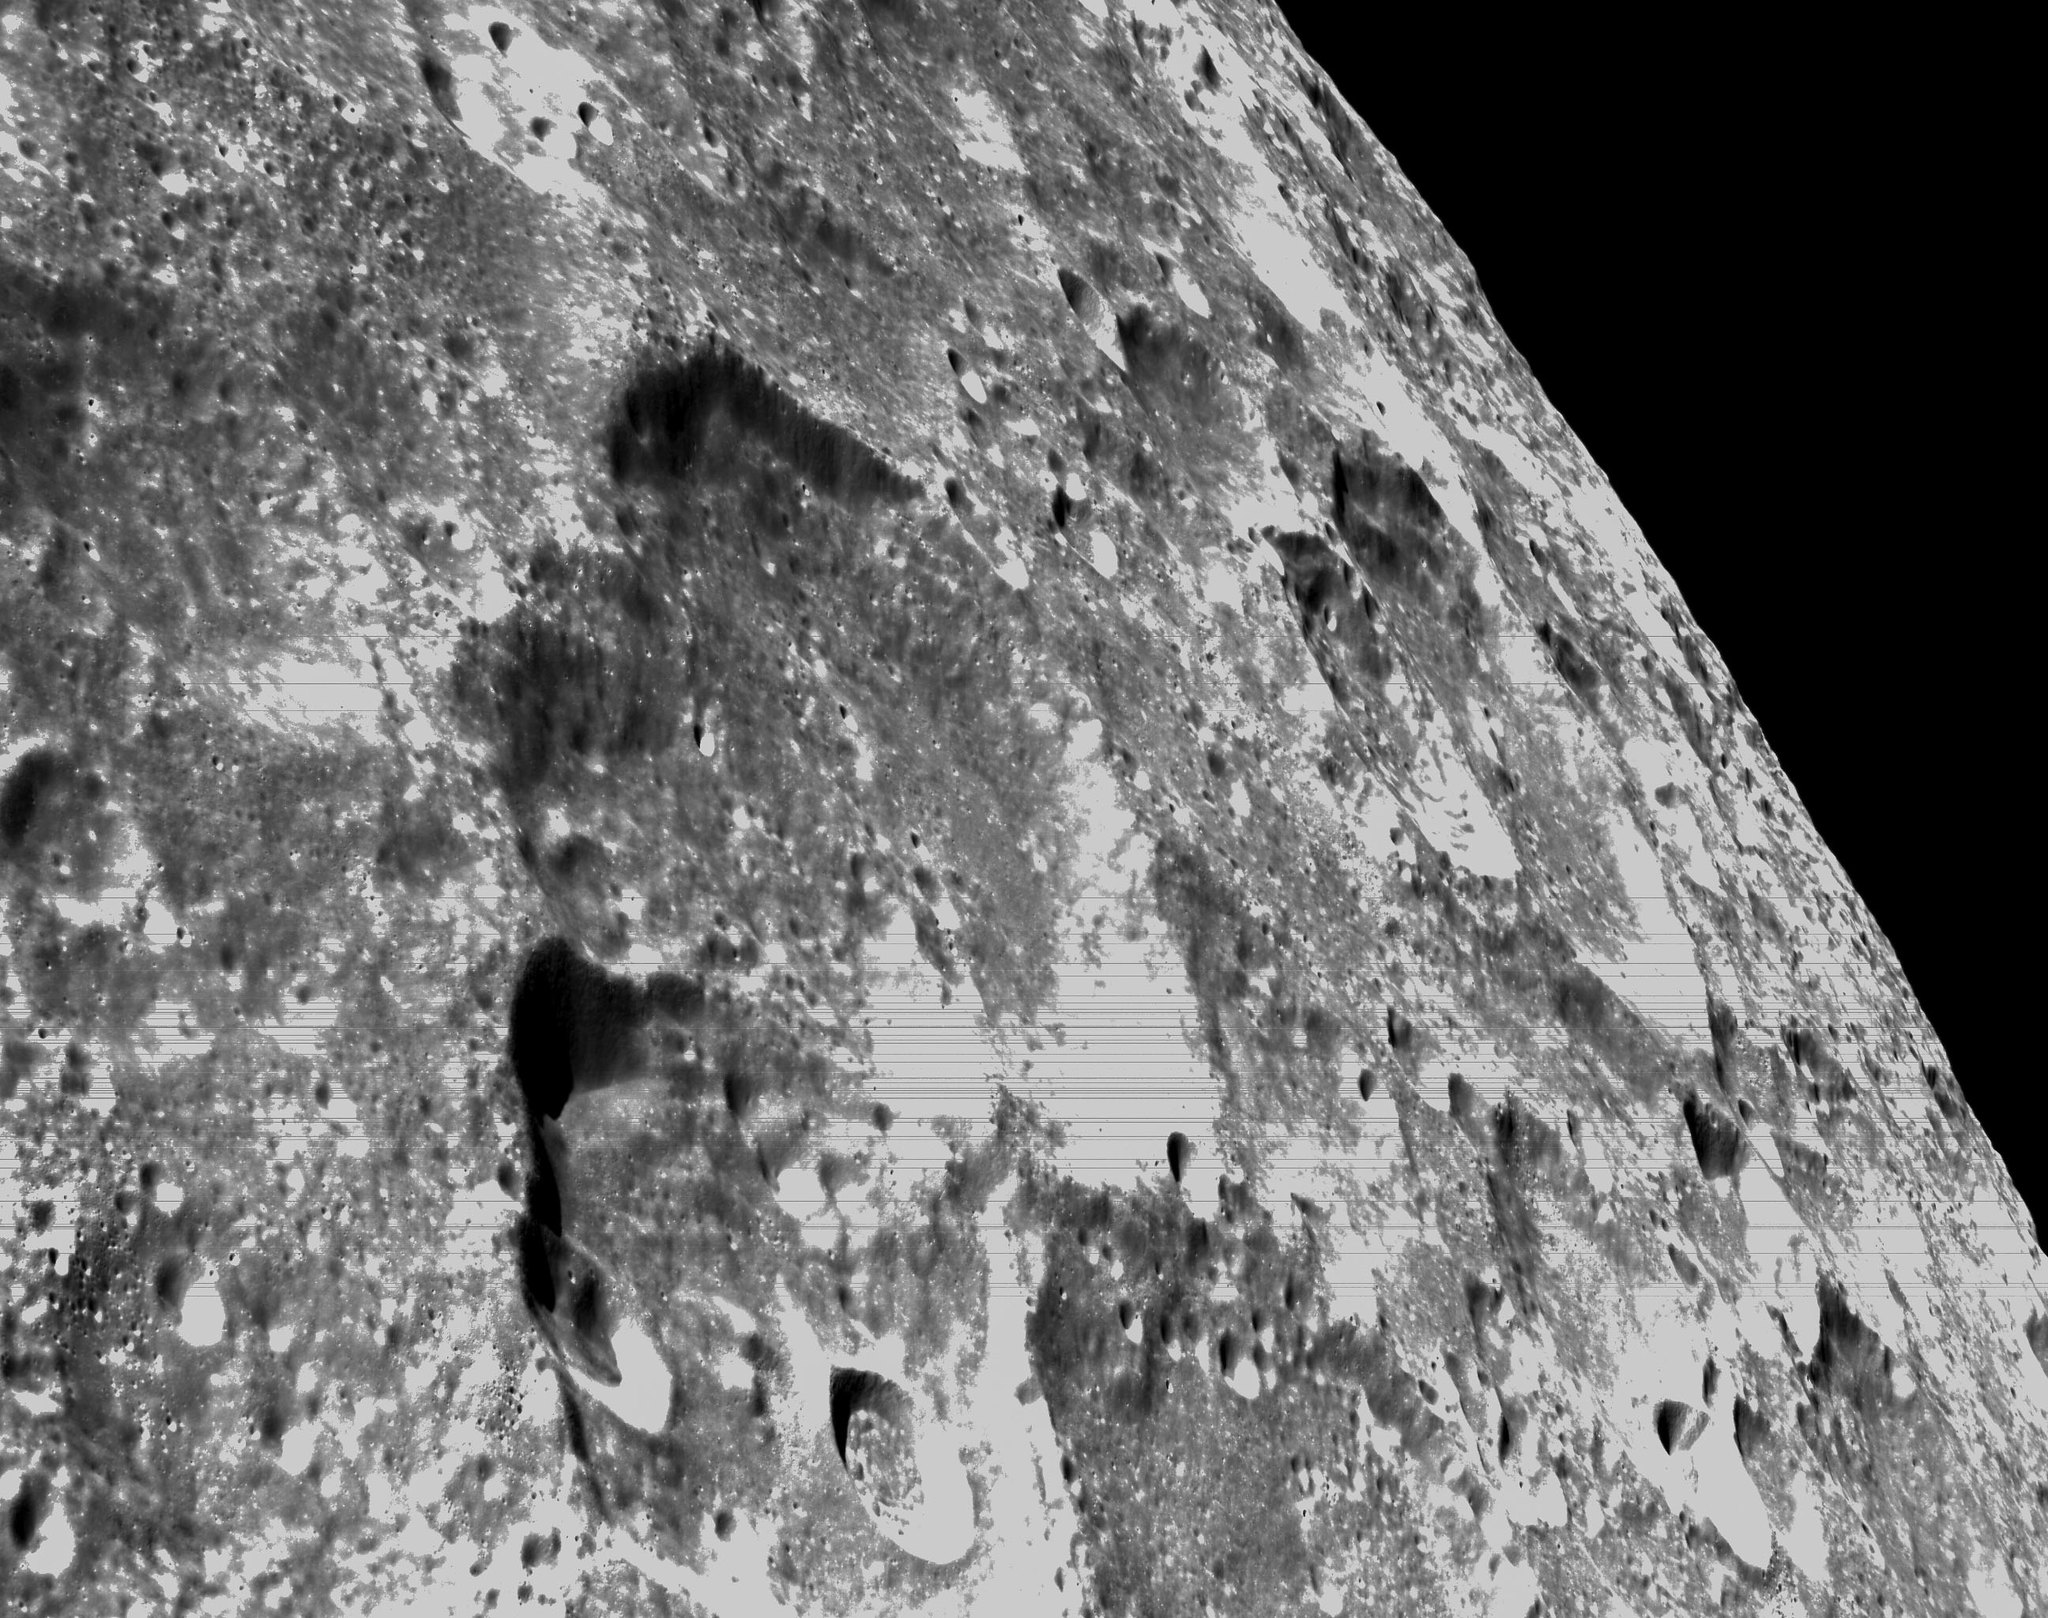 A close-up photograph of the lunar surface by the Artemis I Mission. Image Credit: NASA.